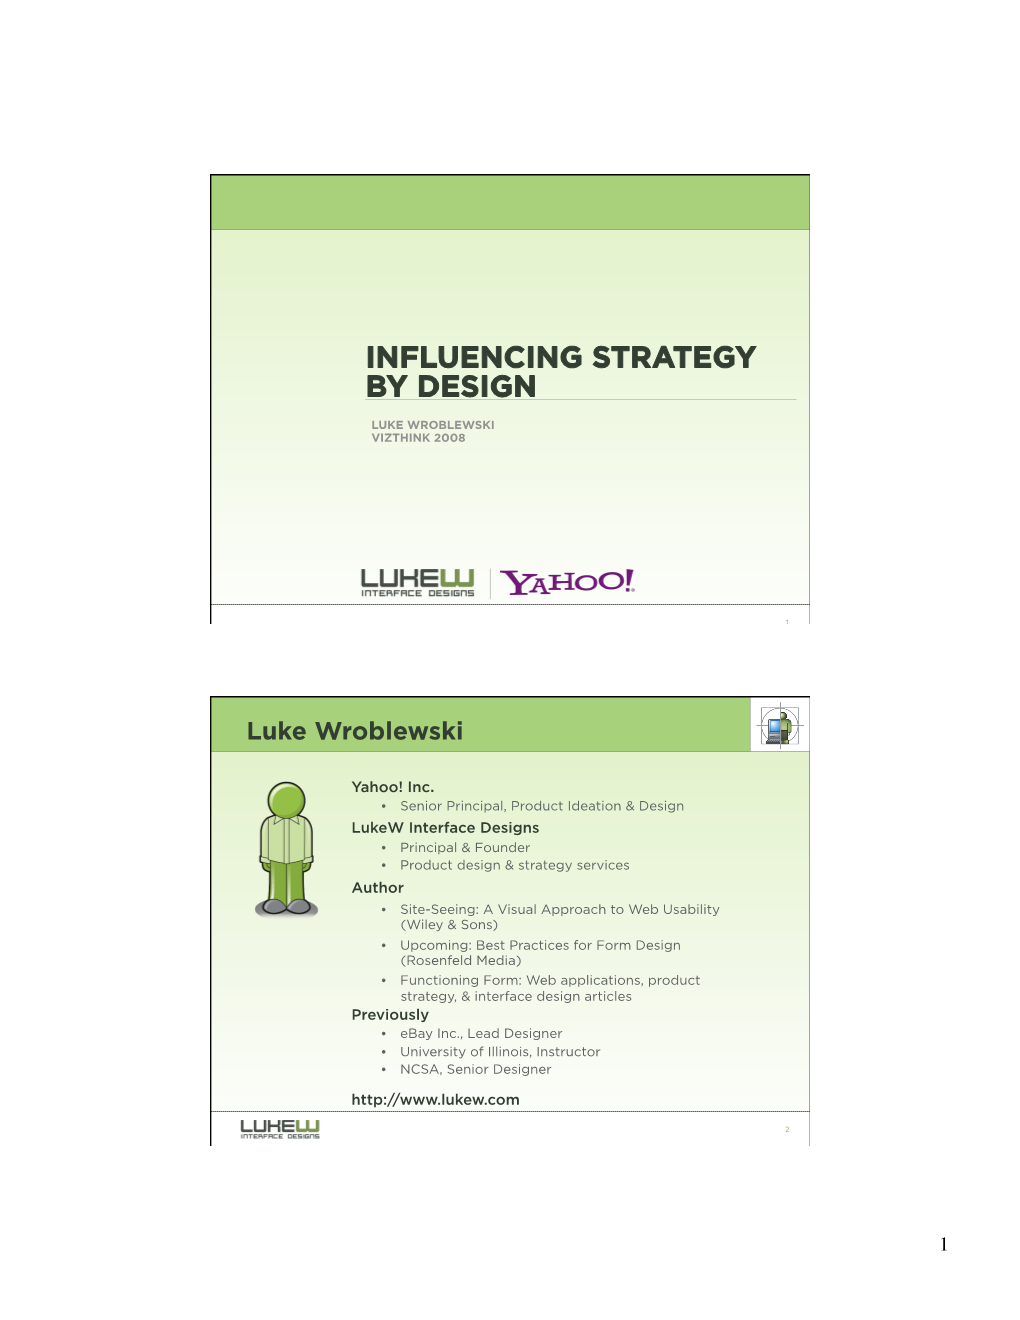 Influencing Strategy by Design